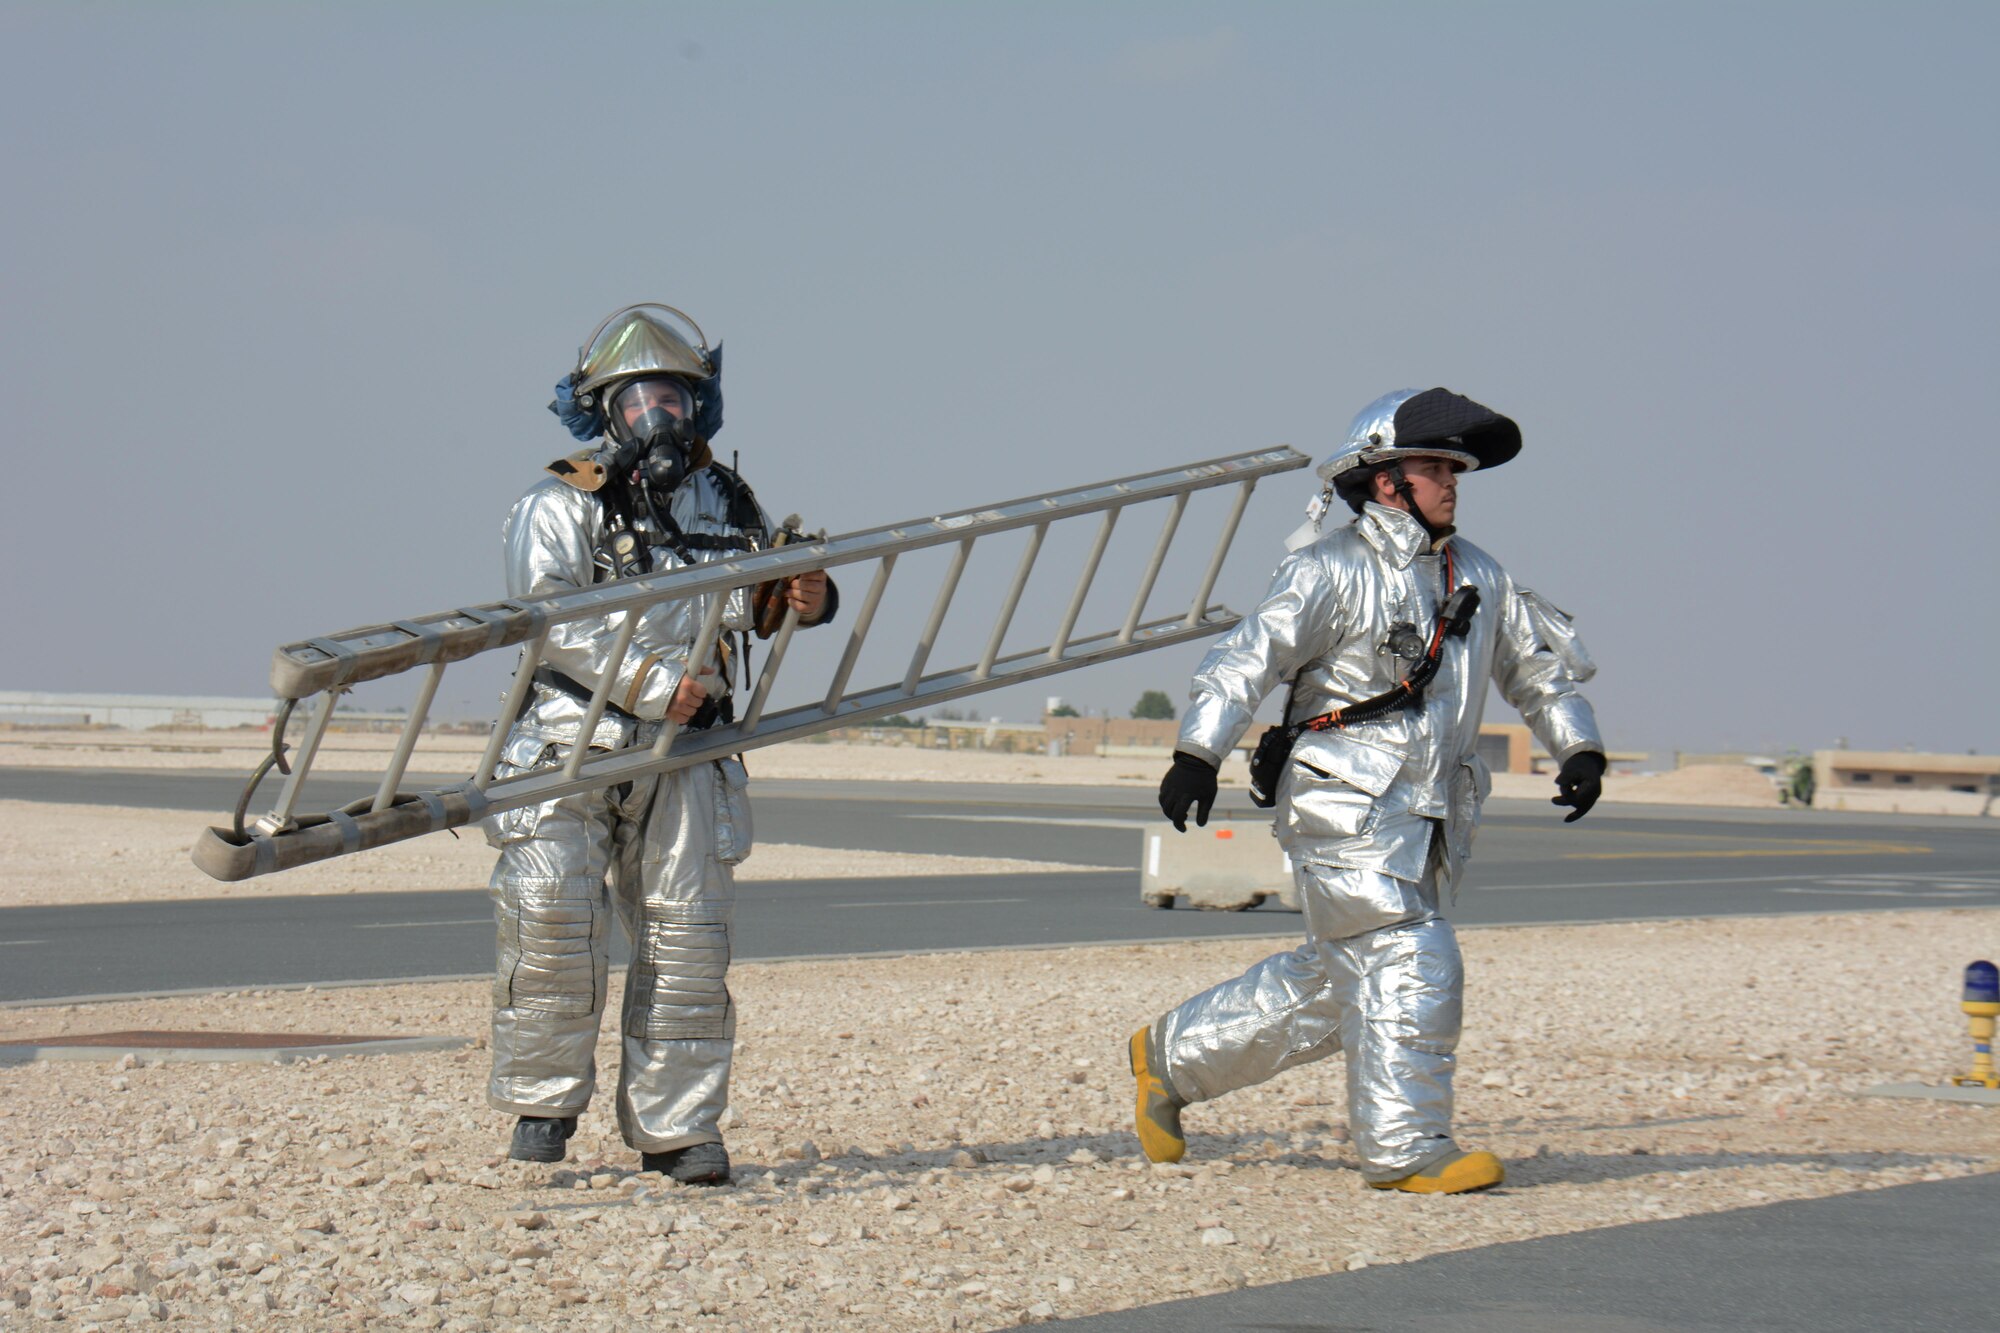 Two 379th Civil Engineer Squadron firefighters, one carrying a ladder, respond to a training exercise at Al Udeid Air Base, Qatar Nov. 20. The ladder was needed to gain access to a KC-135 Stratotanker to rescue a injured air crew member from the cockpit. Training exercises help first responders maintain their skillsets. (U.S. Air Force photo by Tech. Sgt. James Hodgman/Released)